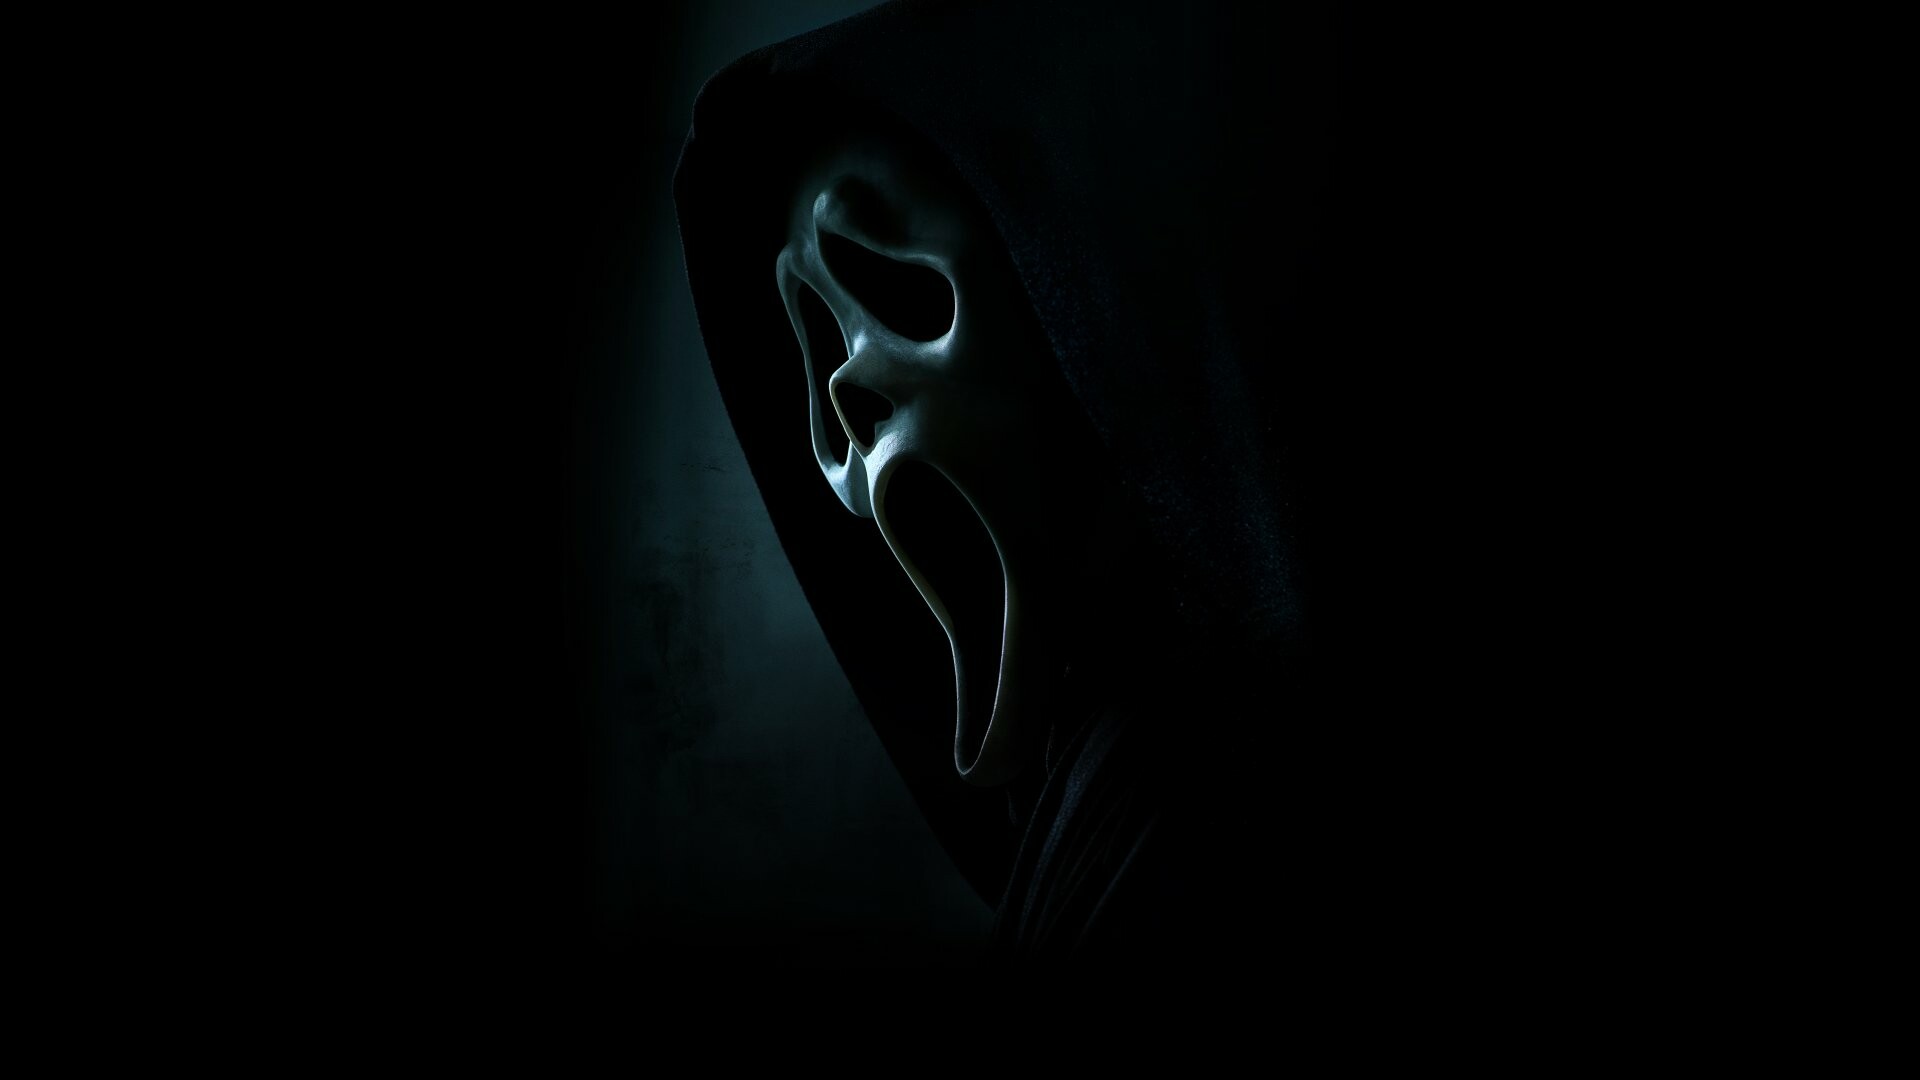 Scream (2022): Ghostface, The film was released on home video on March 29, 2022. 1920x1080 Full HD Wallpaper.